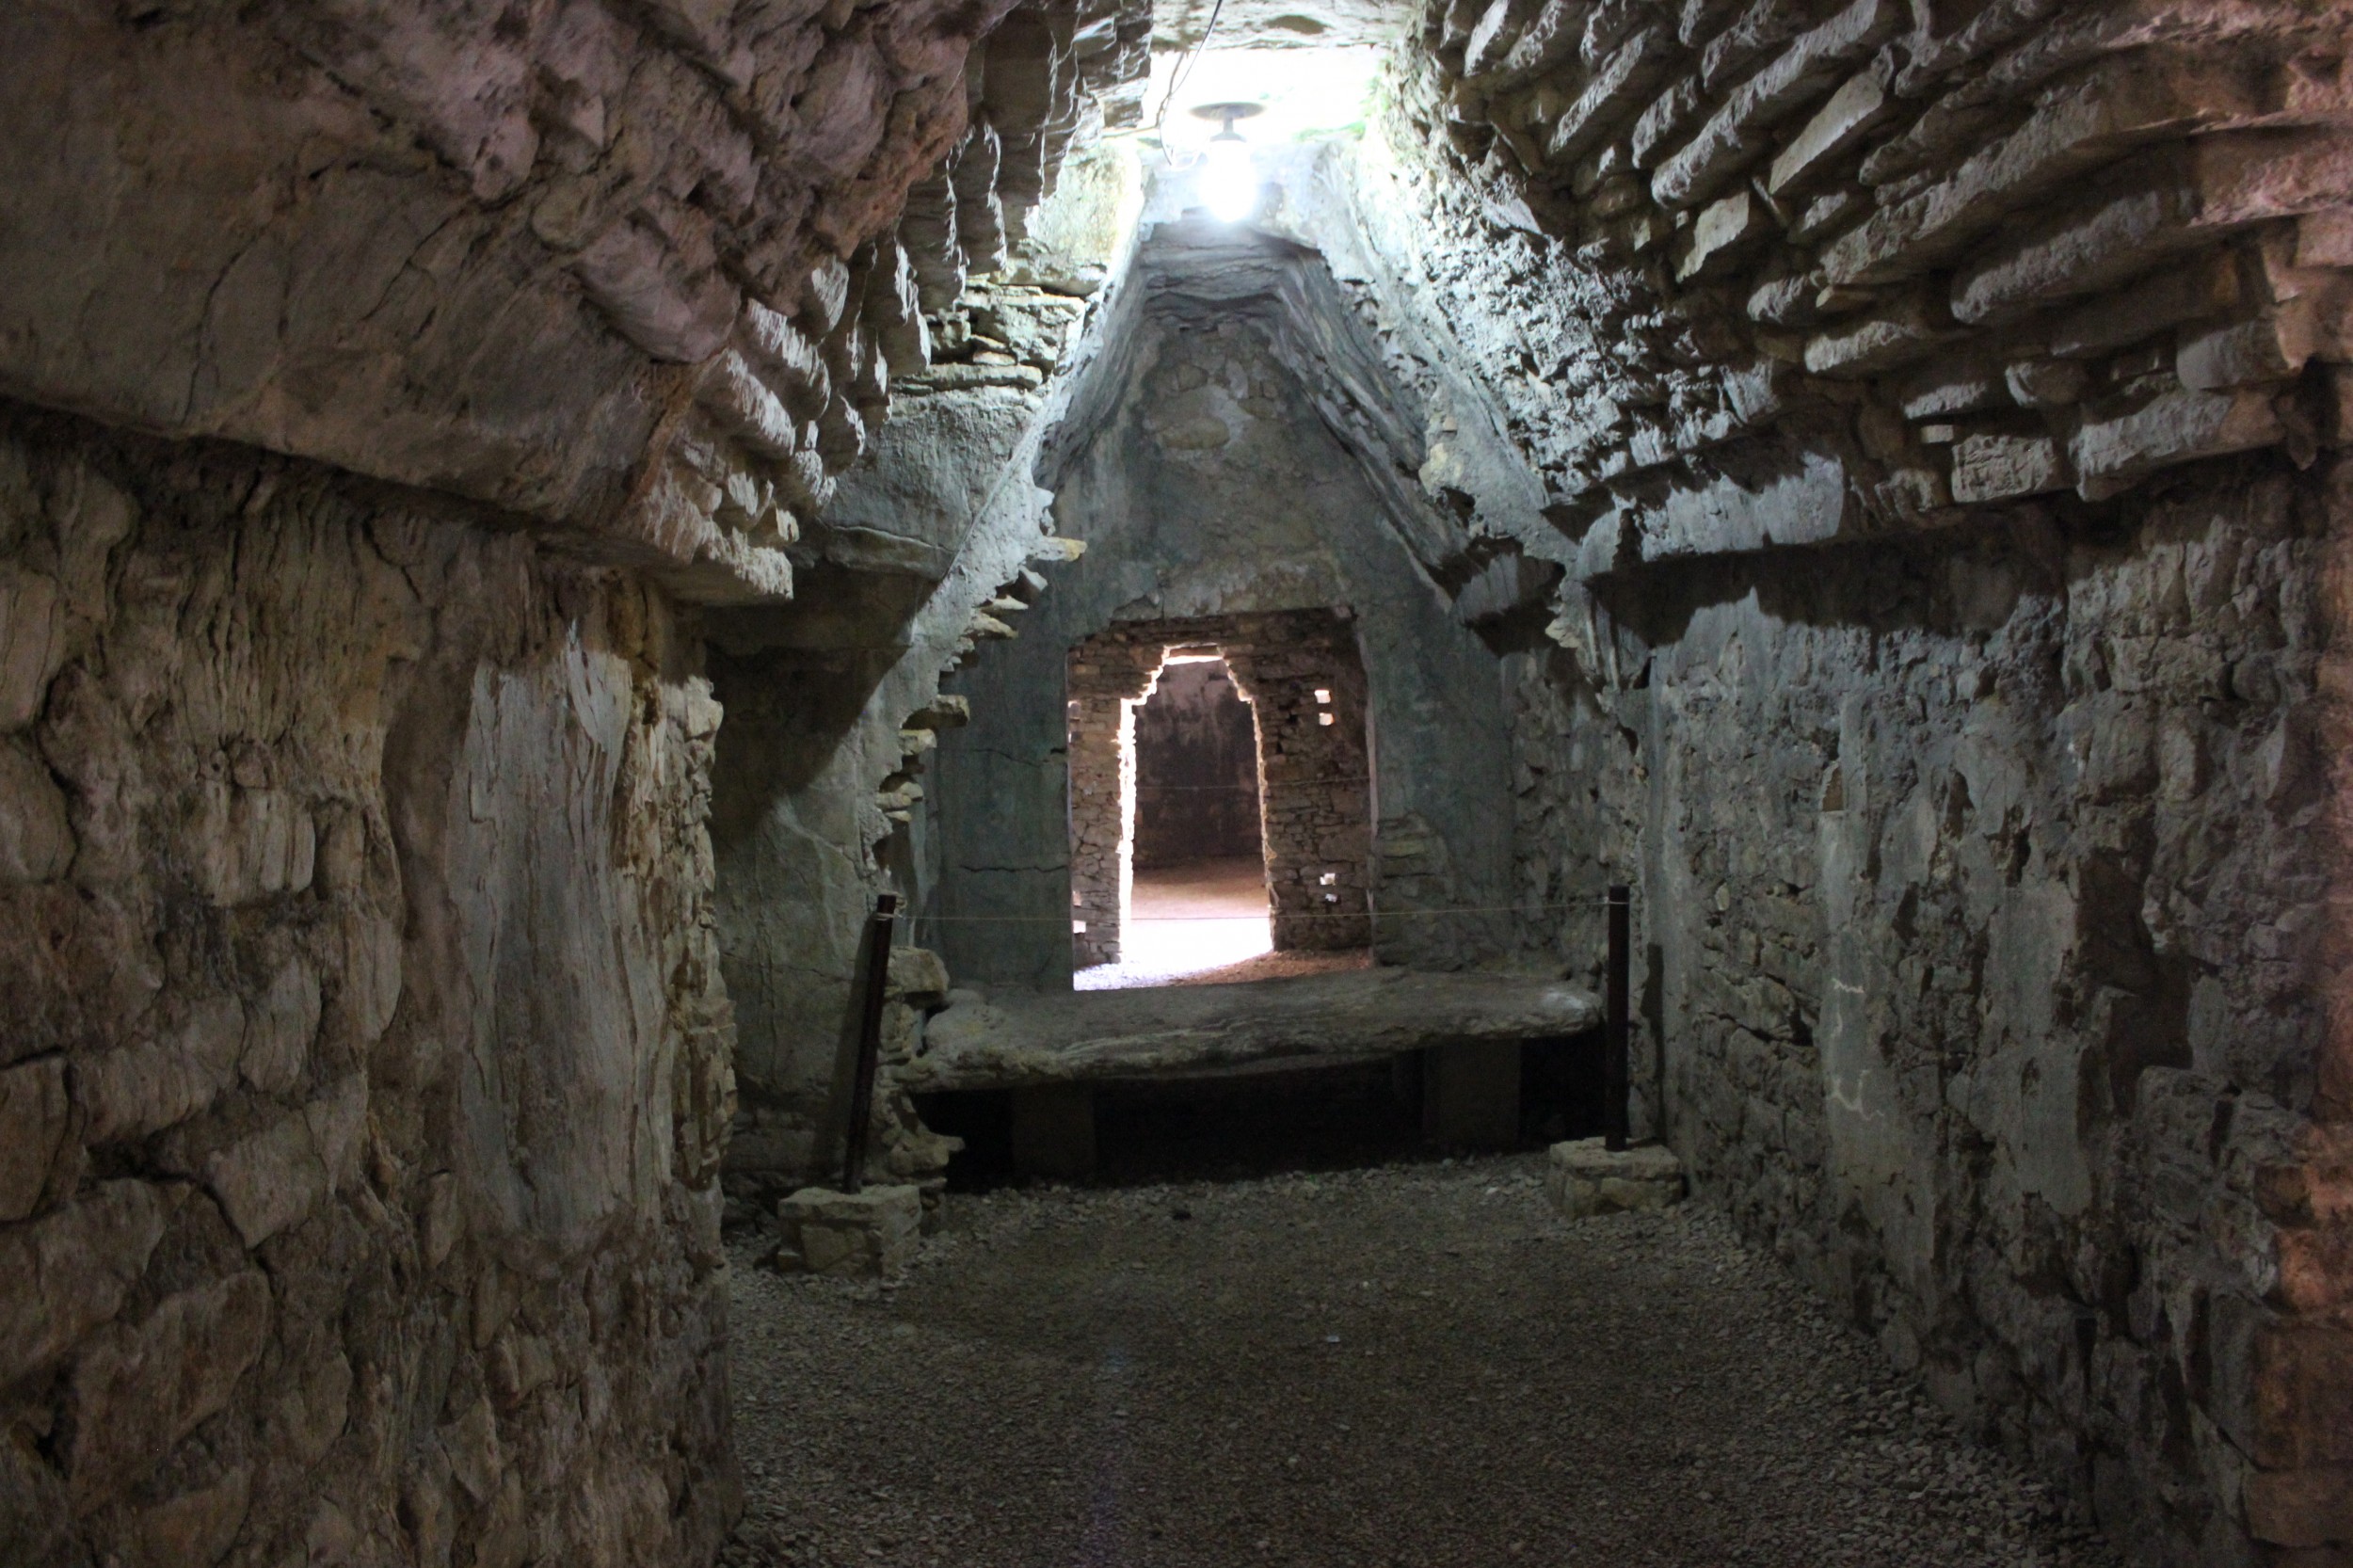 Underground sleeping chambers, complete with stone beds.